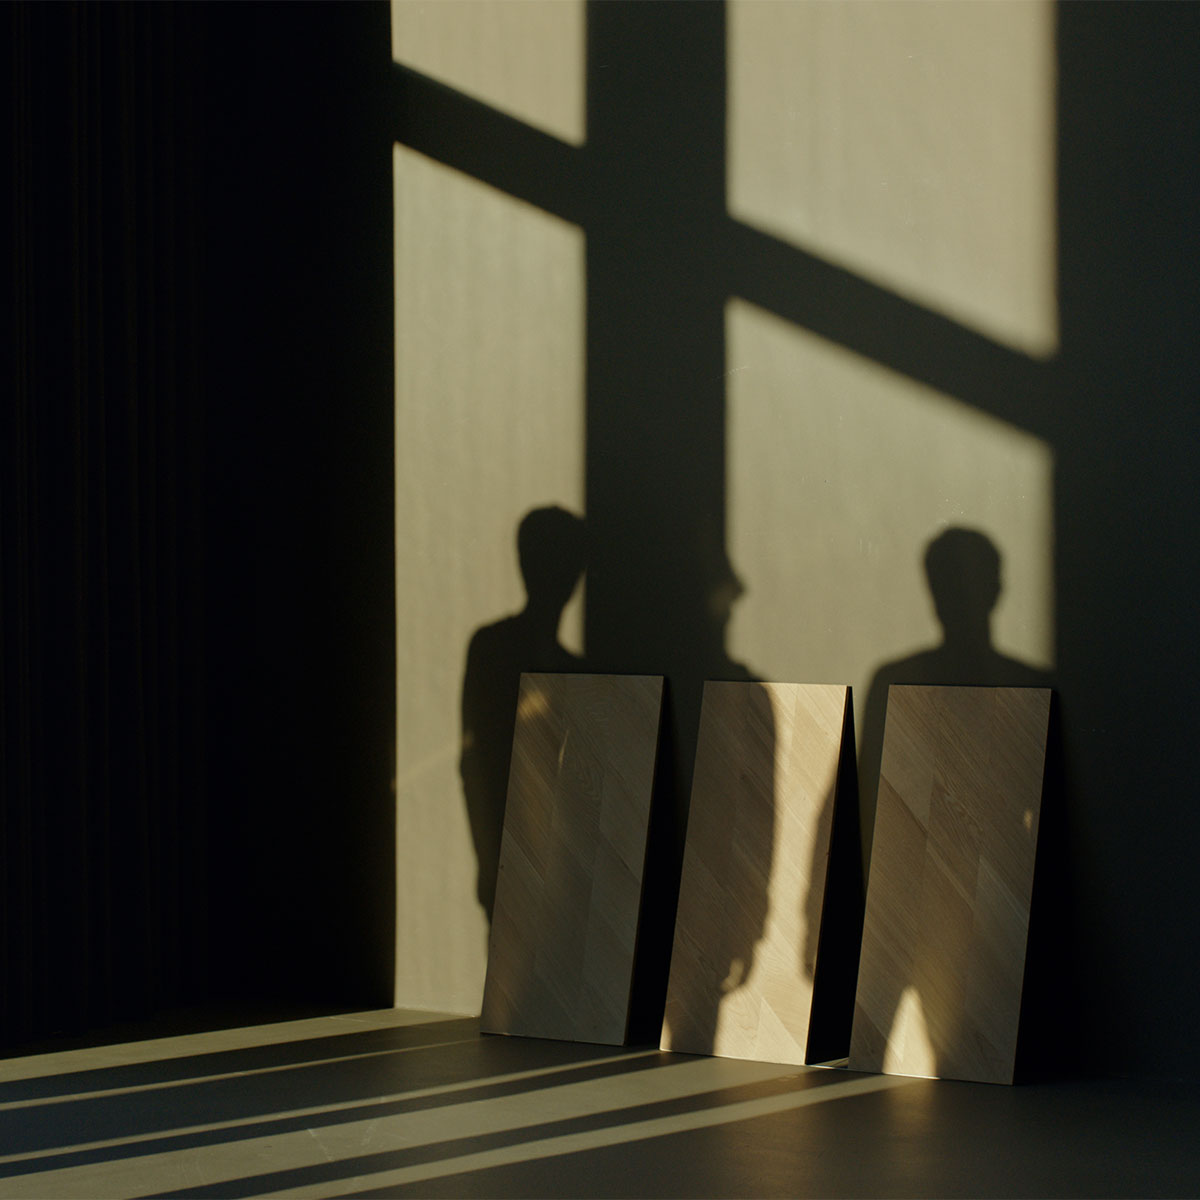 Shadow of the three founders of atelier oï and Spinpark planks